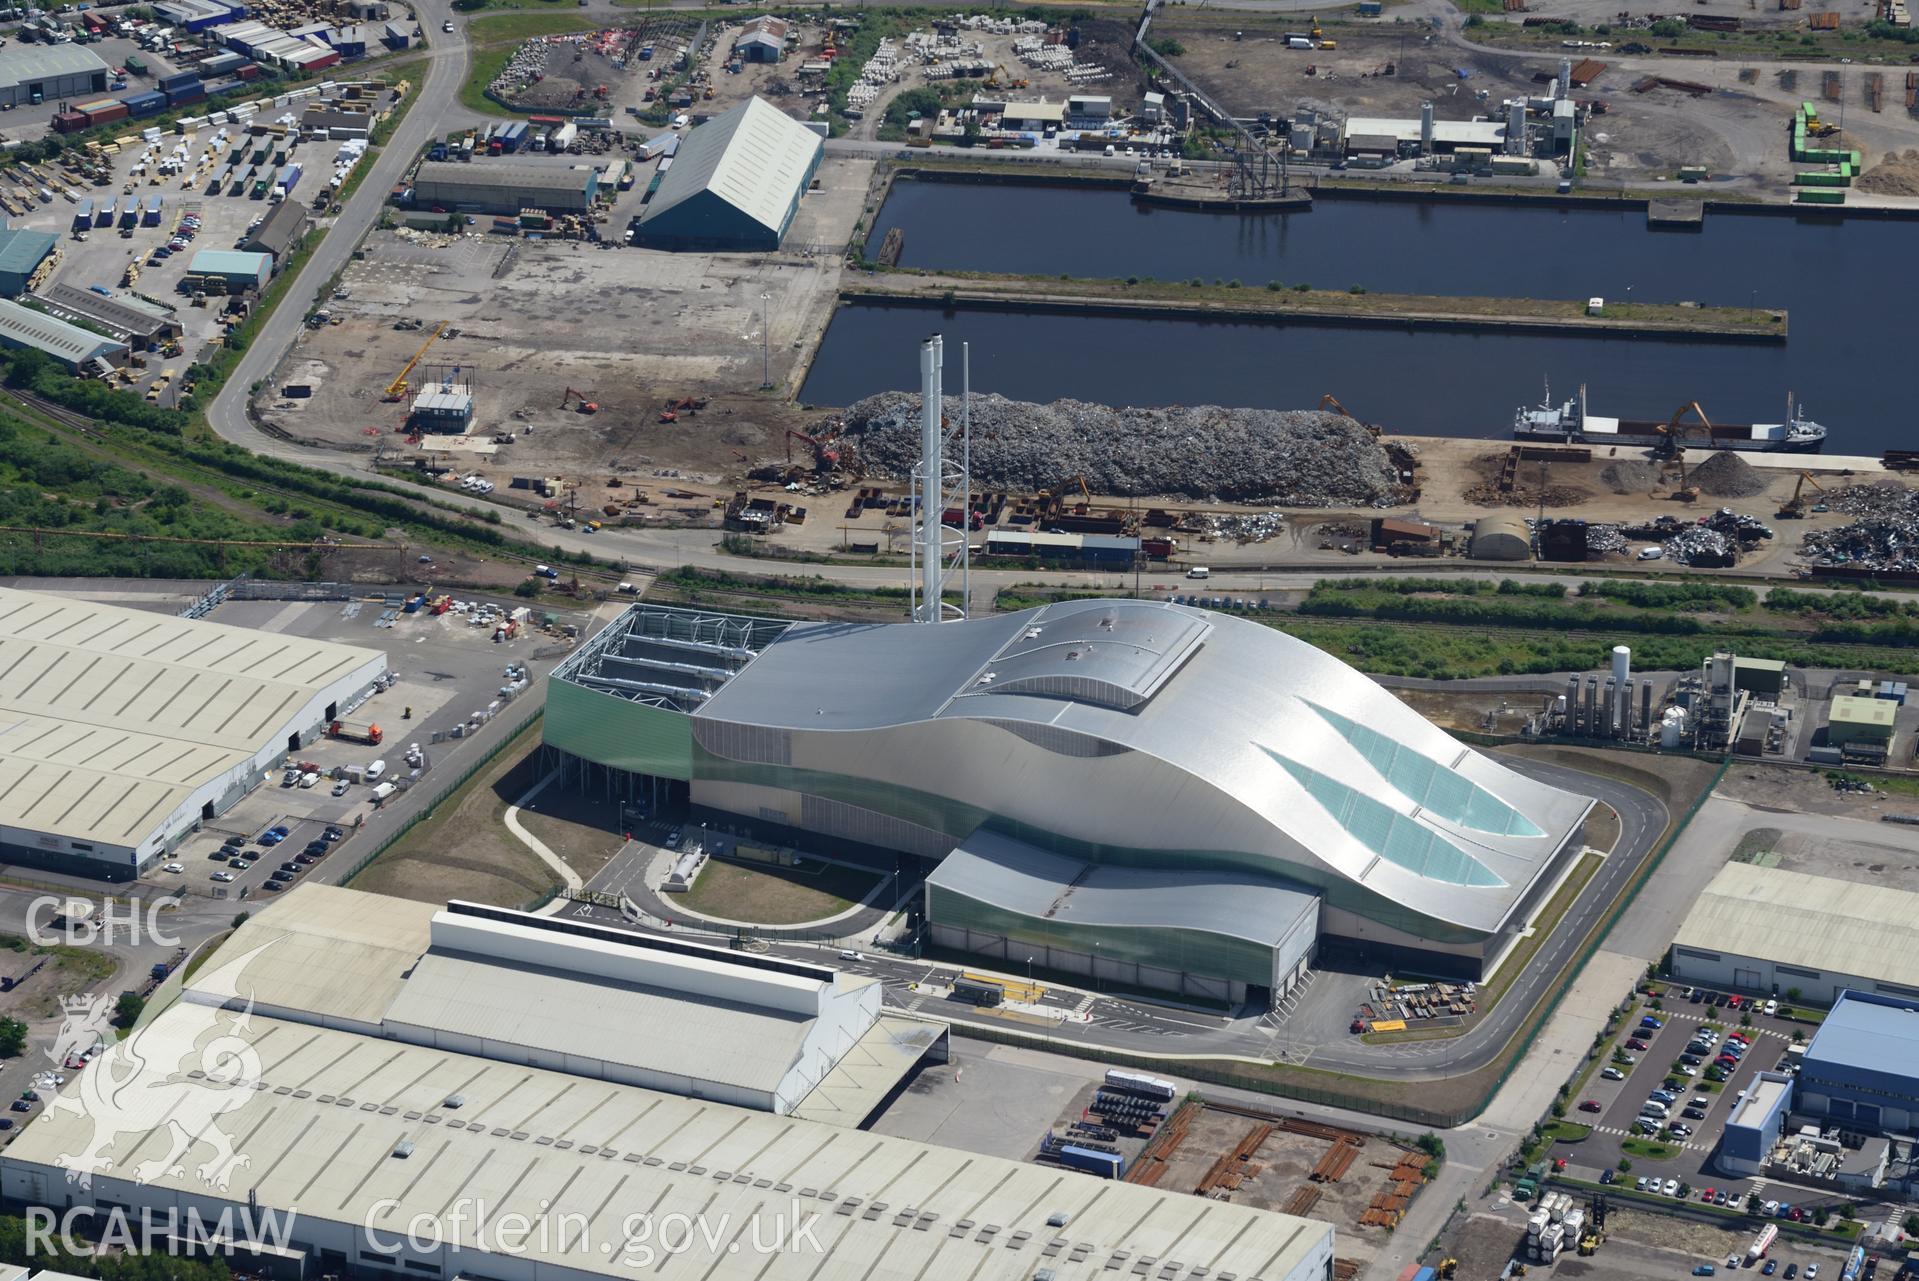 Cardiff Energy Recovery Facility and Roath Docks at Cardiff Docks, Cardiff Bay. Oblique aerial photograph taken during the Royal Commission's programme of archaeological aerial reconnaissance by Toby Driver on 29th June 2015.